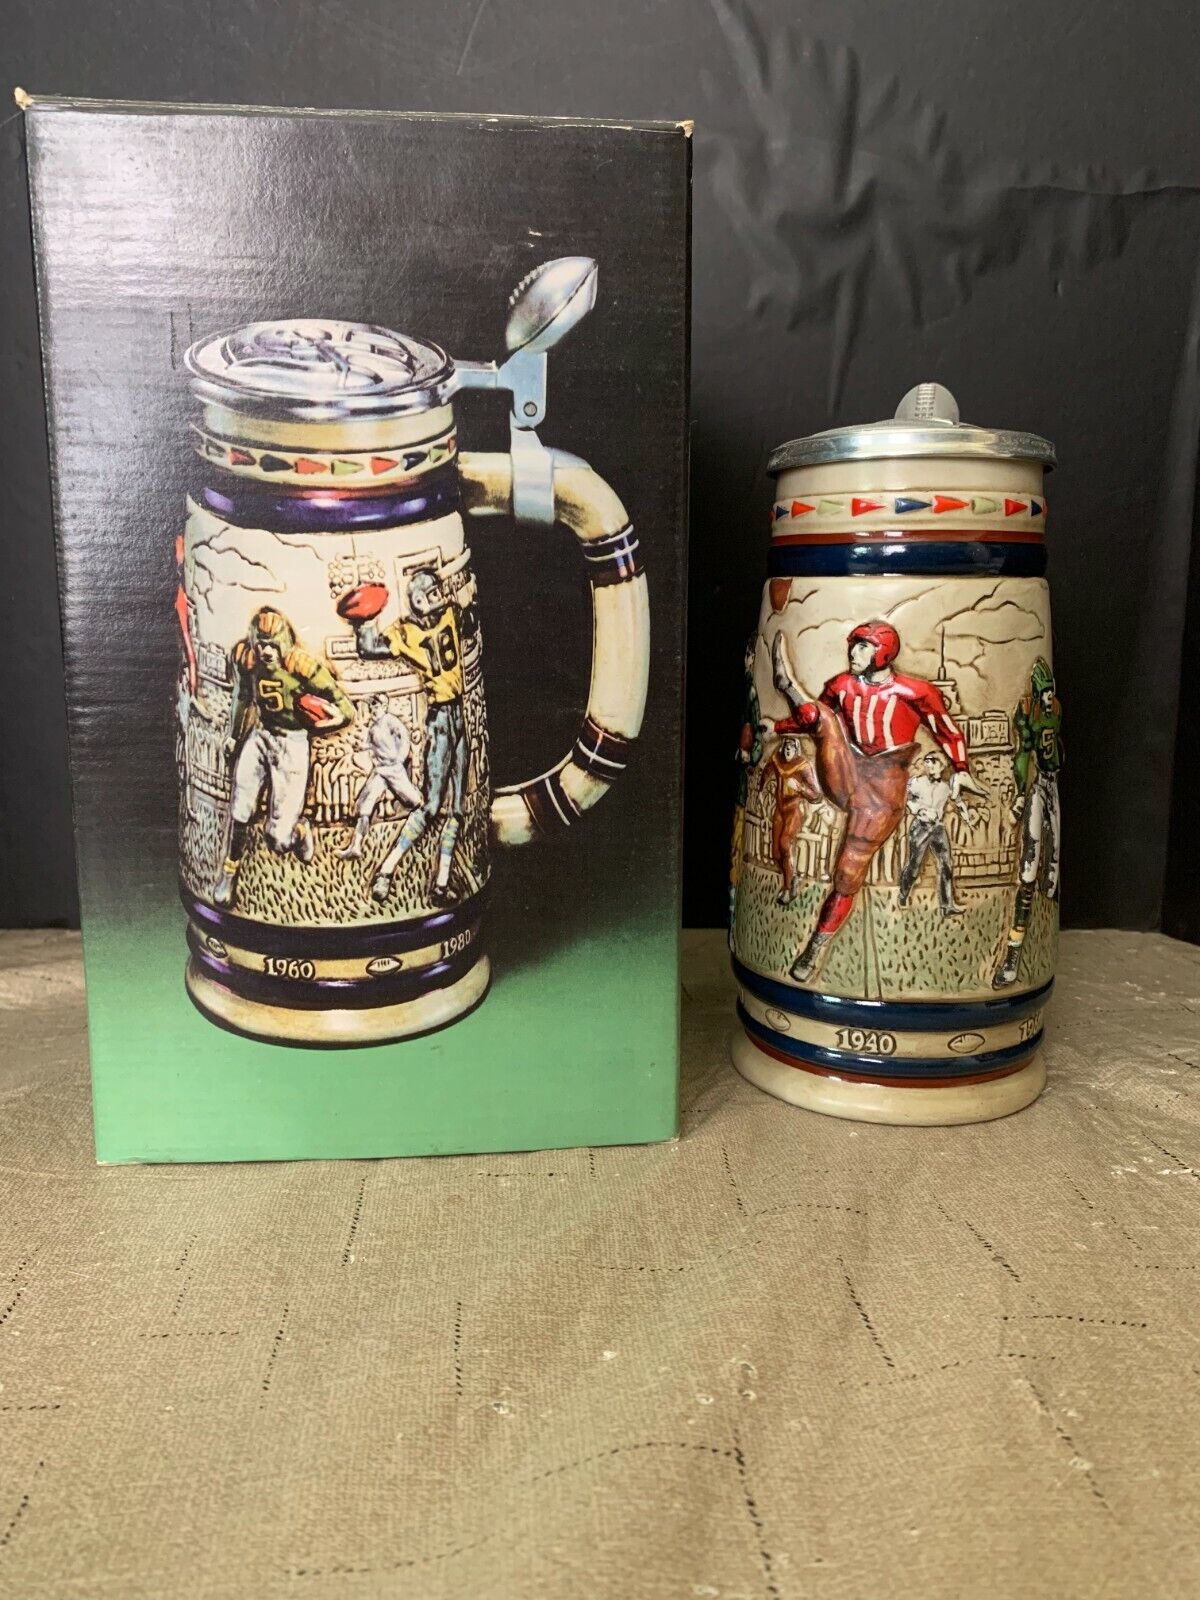 1983 Great American Football Avon Stein With Box